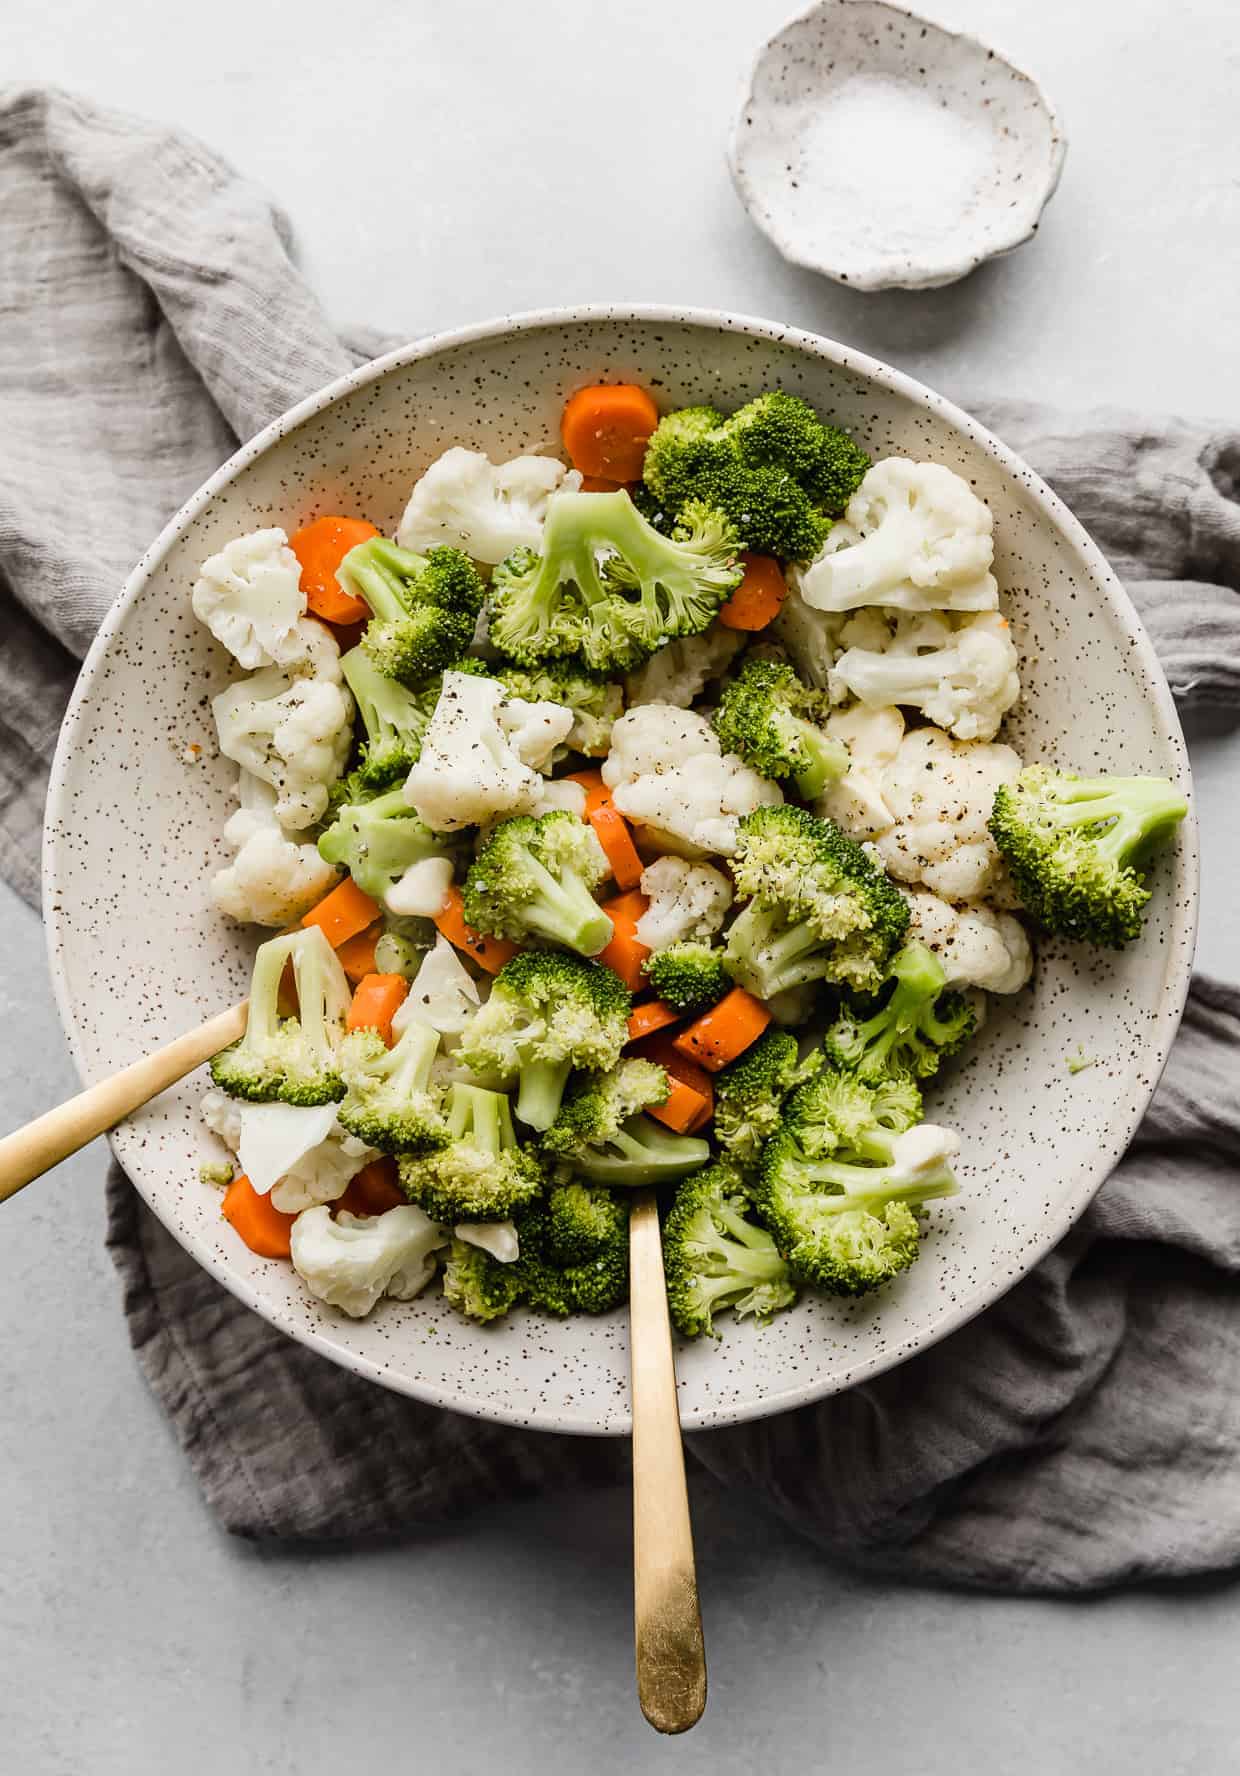 Buttered Vegetables featuring broccoli, cauliflower, and carrots in a serving bowl.